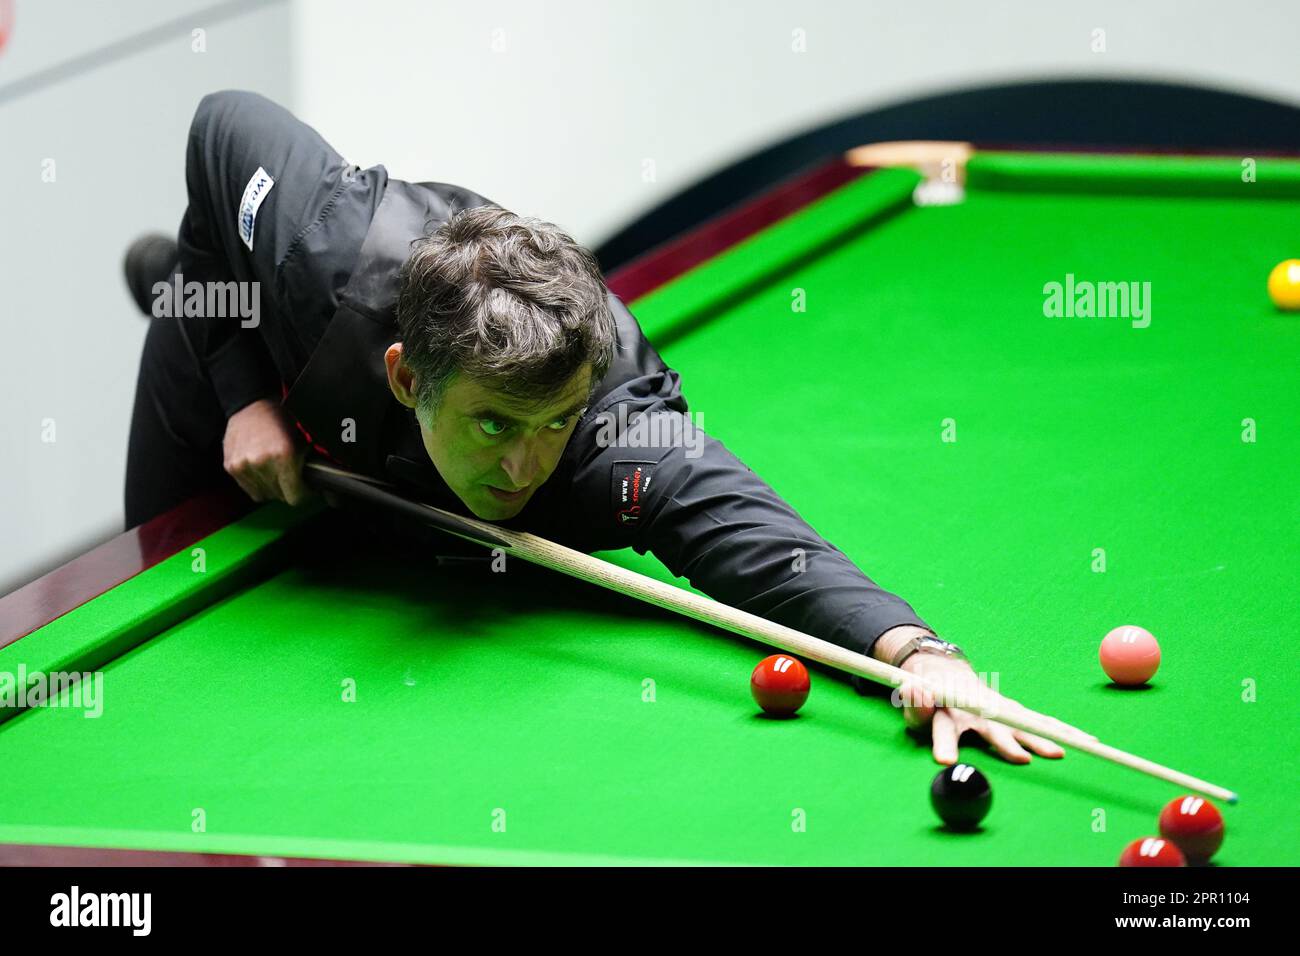 Ronnie OSullivan in action against Luca Brecel (not pictured) on day eleven of the Cazoo World Snooker Championship at the Crucible Theatre, Sheffield